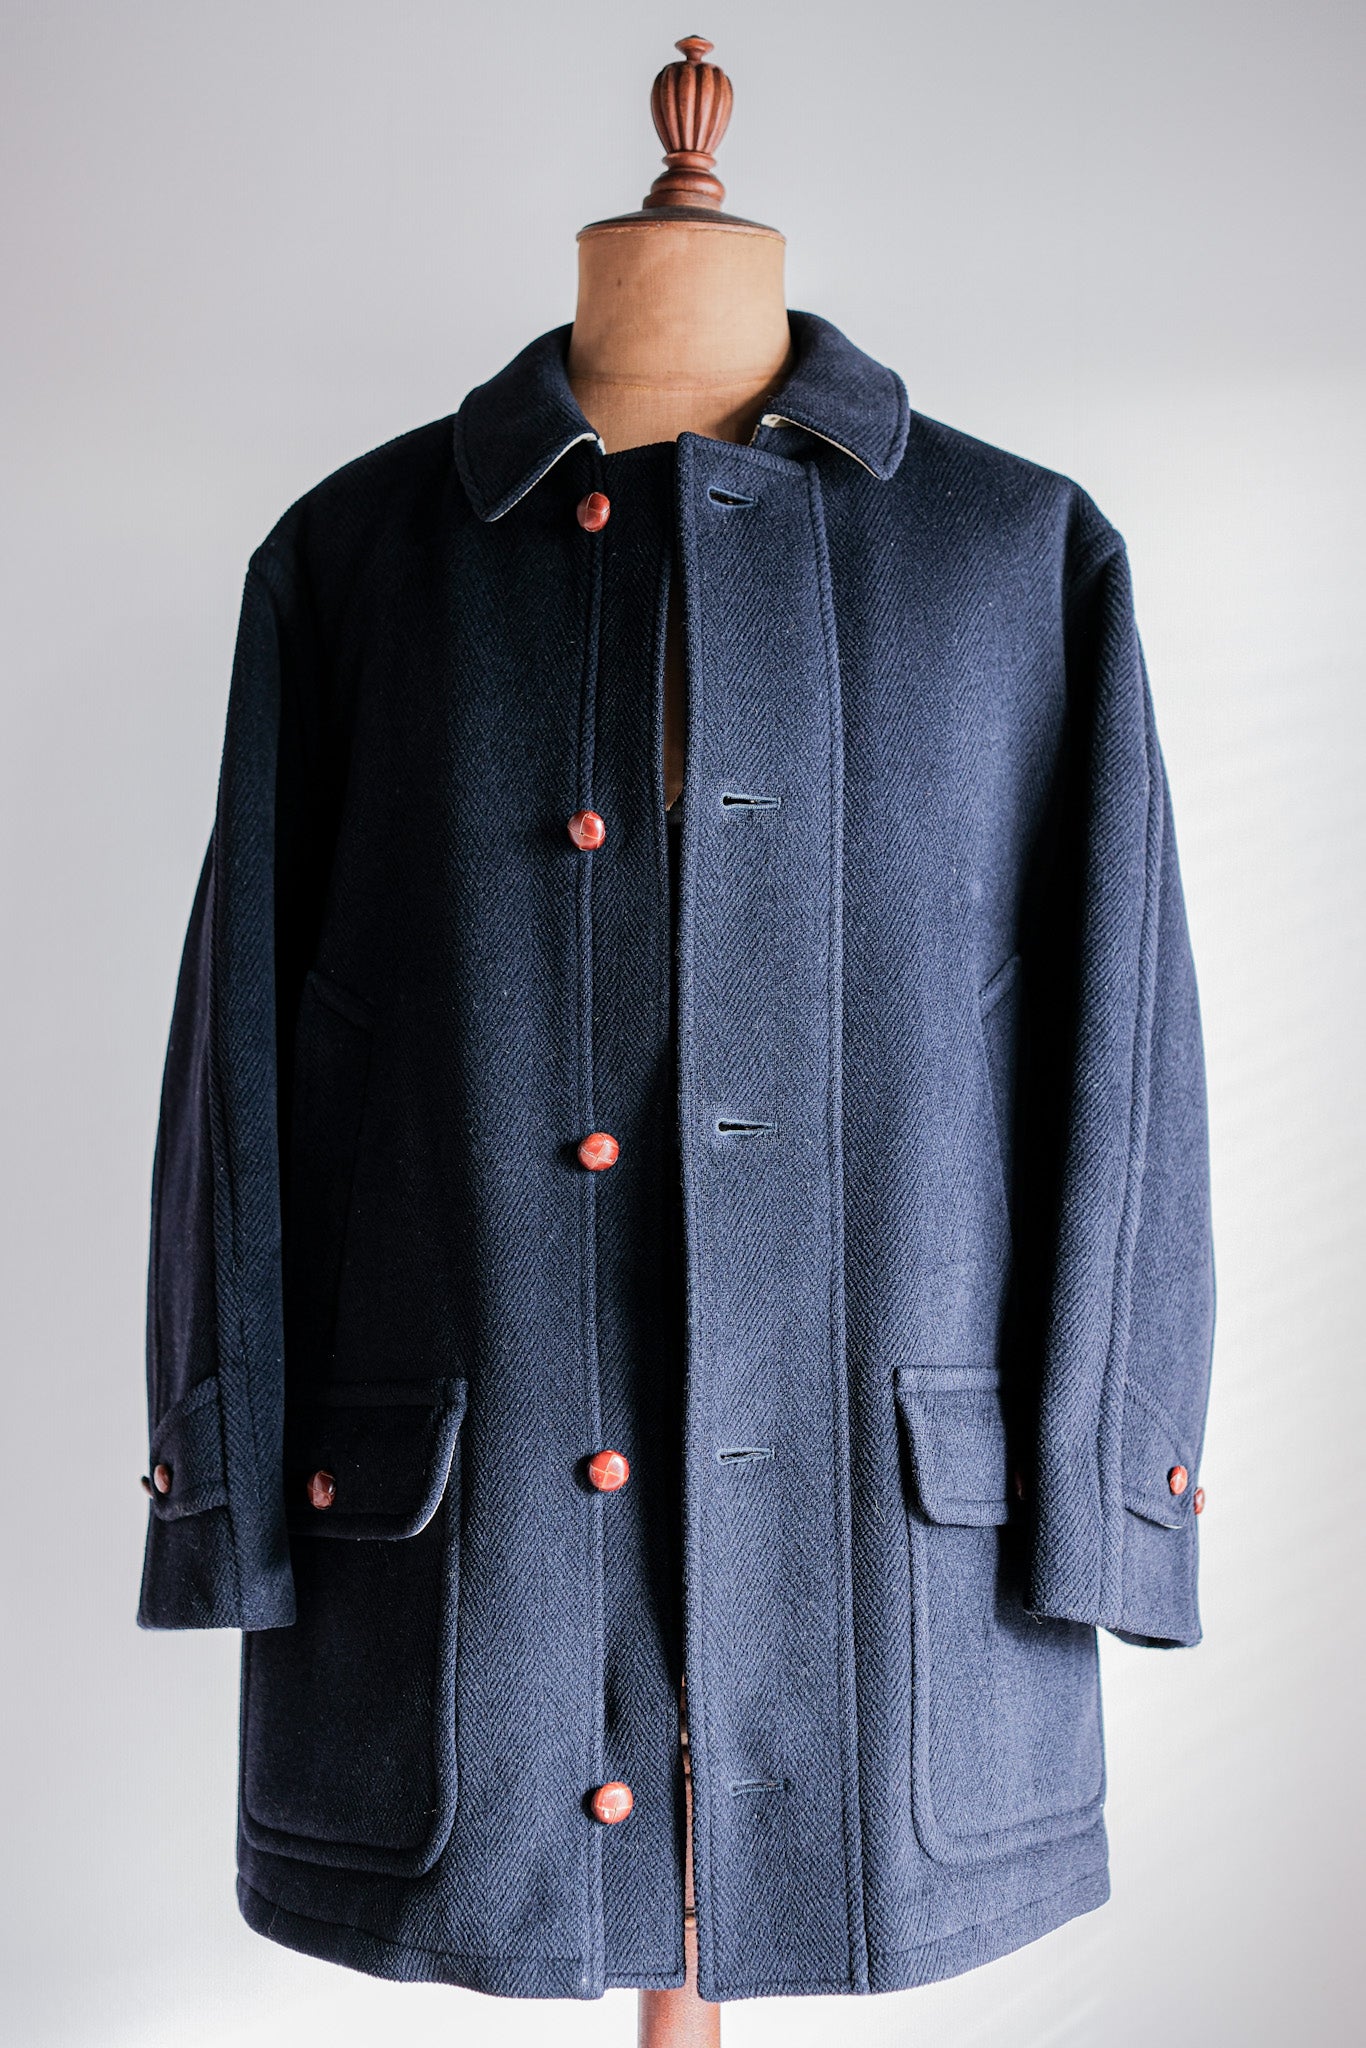 【~90's】Old INVERTERE HBT Wool Jacket With Chin Strap Size.40 "Moorbrook"